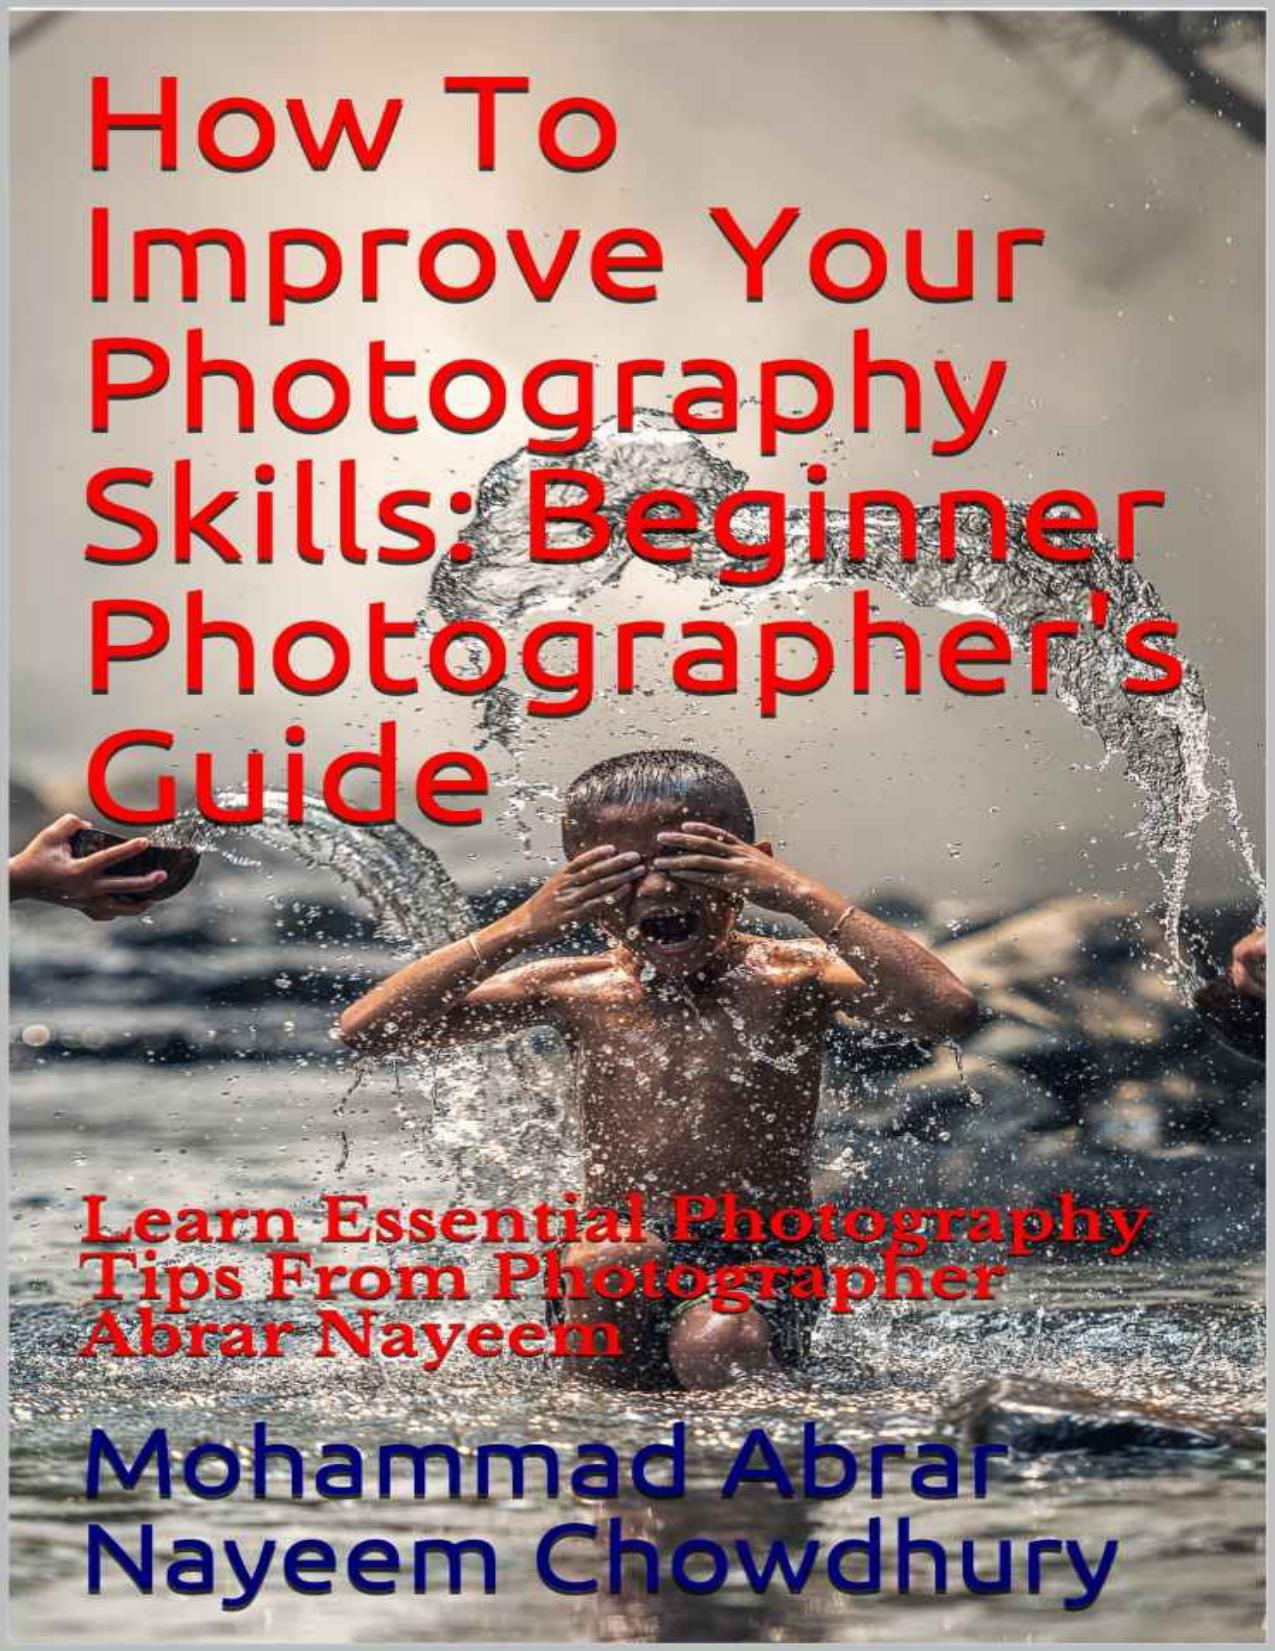 How To Improve Your Photography Skills: Beginner Photographer's Guide : Learn Essential Photography Tips From Photographer Abrar Nayeem by Mohammad Abrar Nayeem Chowdhury